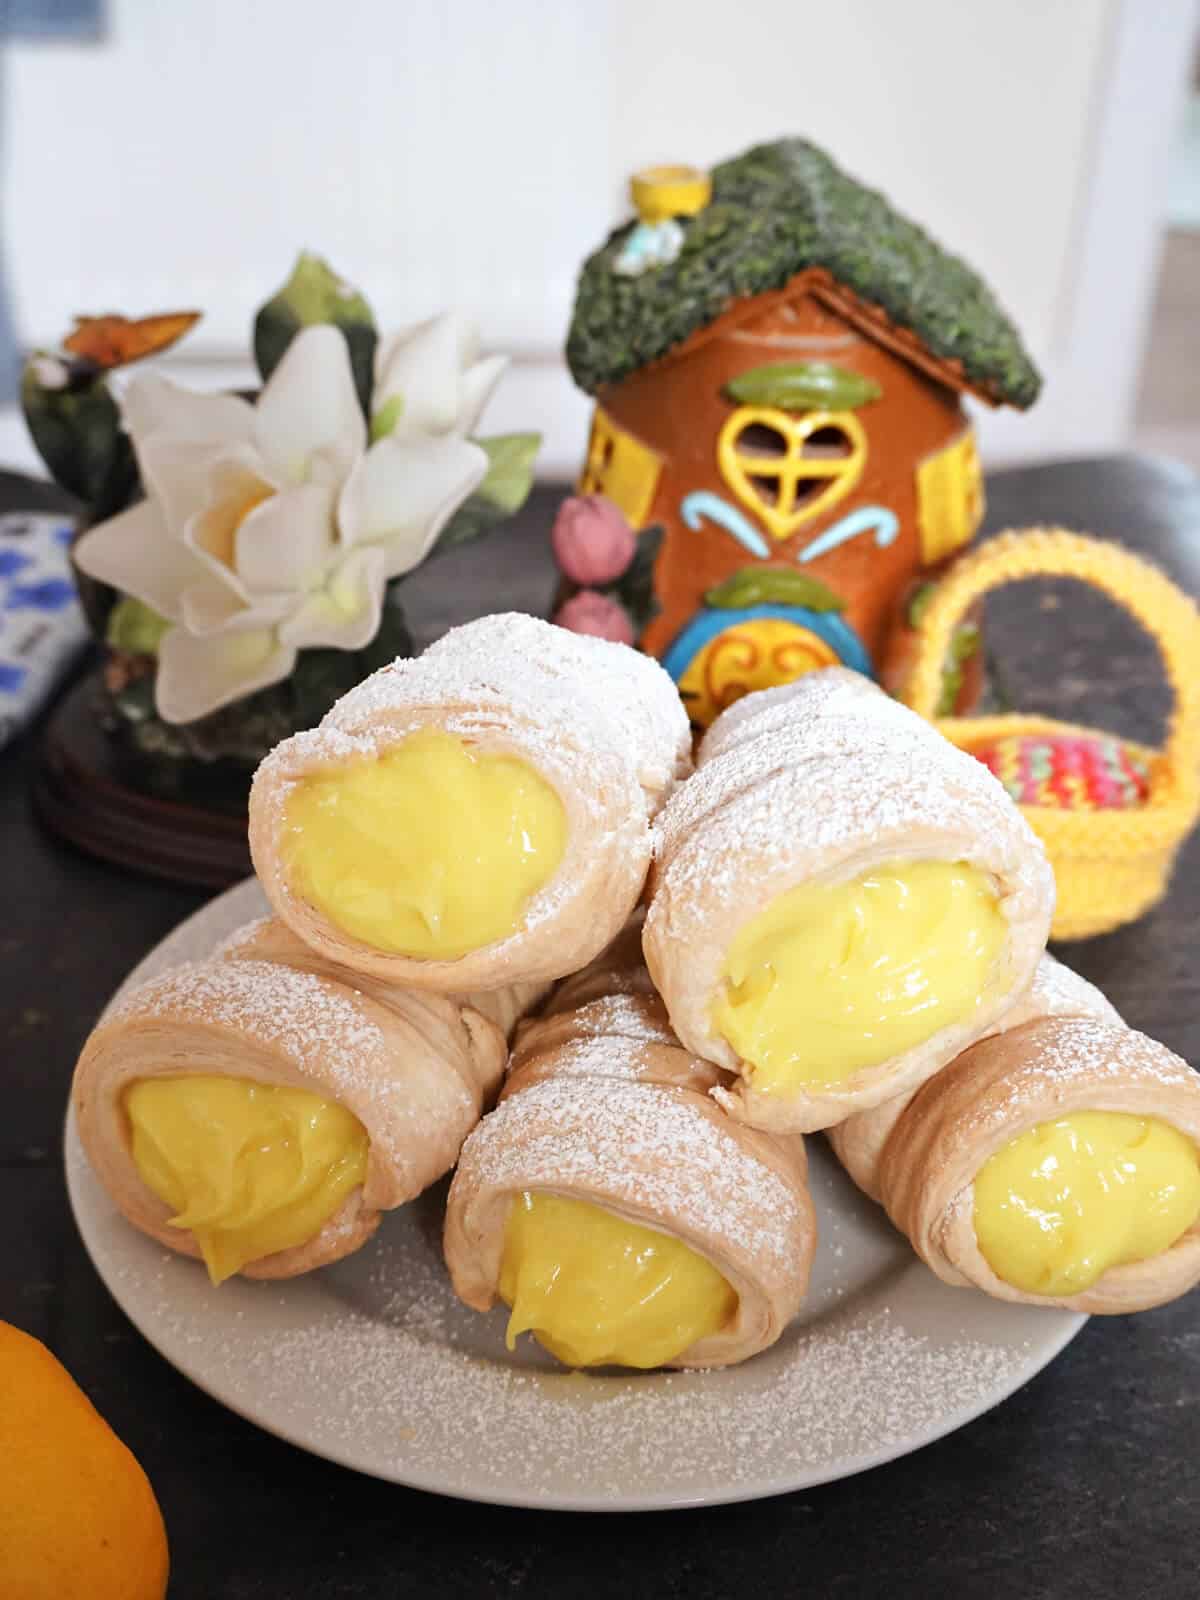 A pile of 5 cream horns on a white plate with decorations in the background.